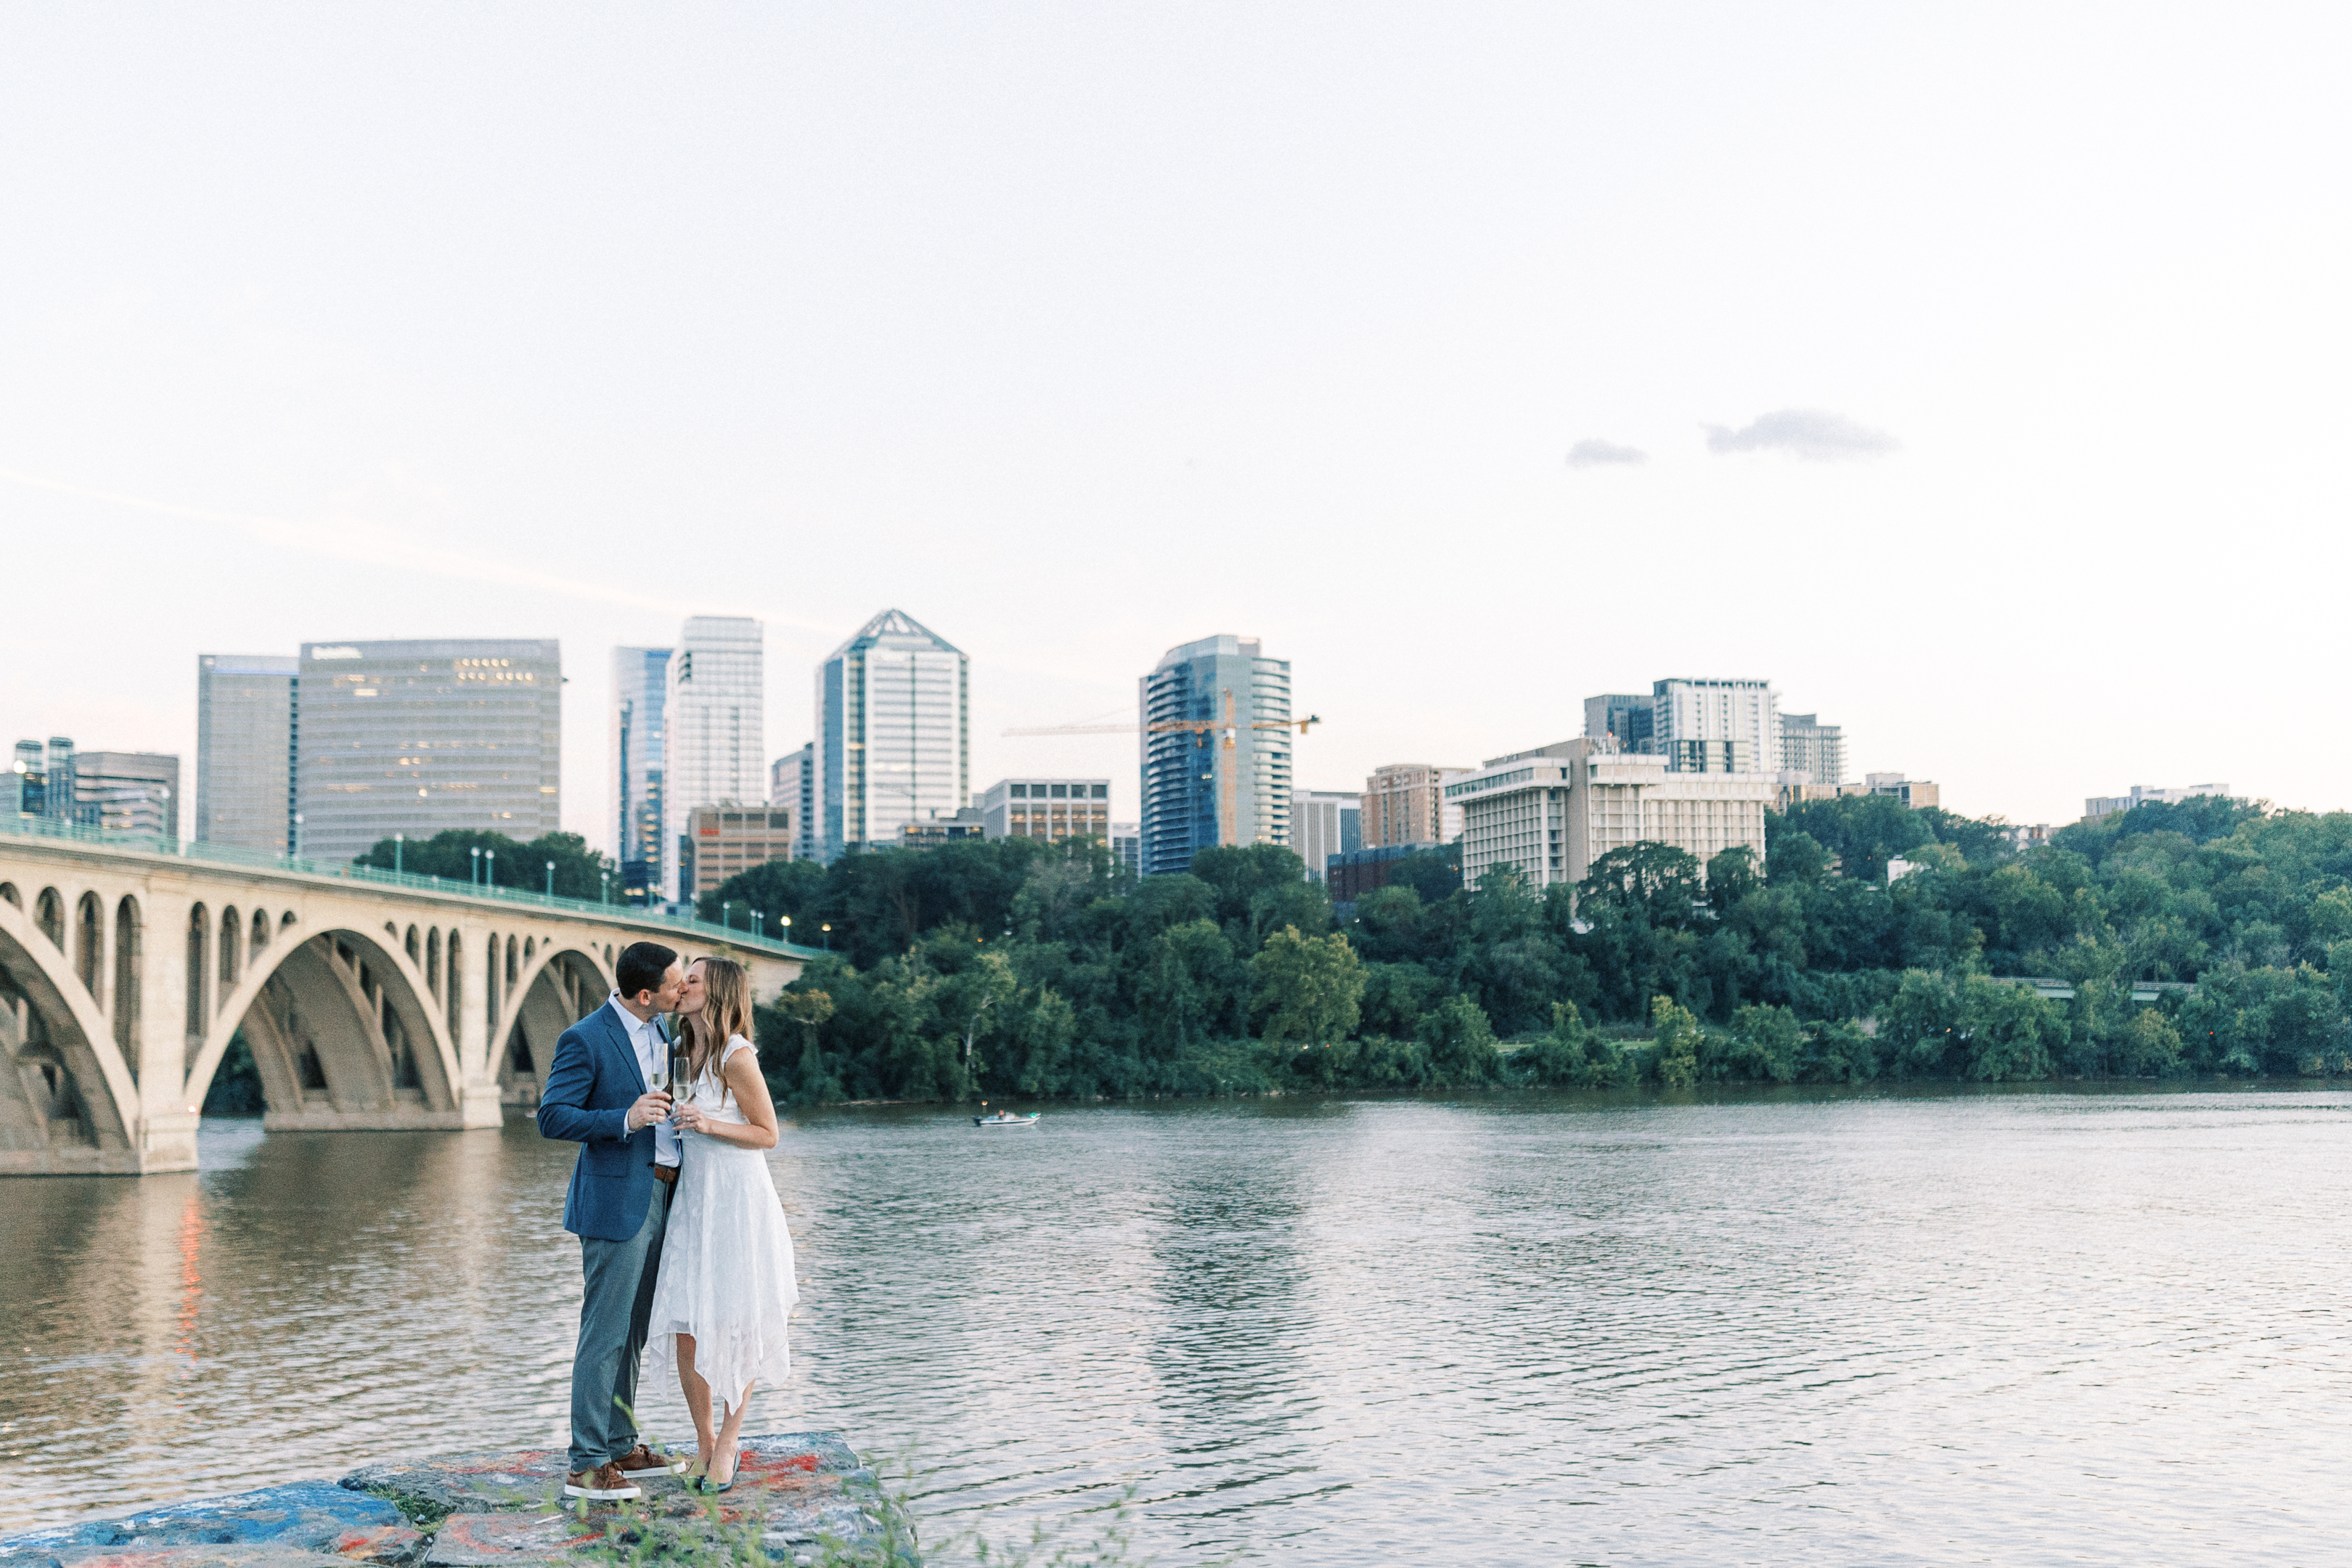 Wedding picture taken in front of Key bridge and the Potomac River